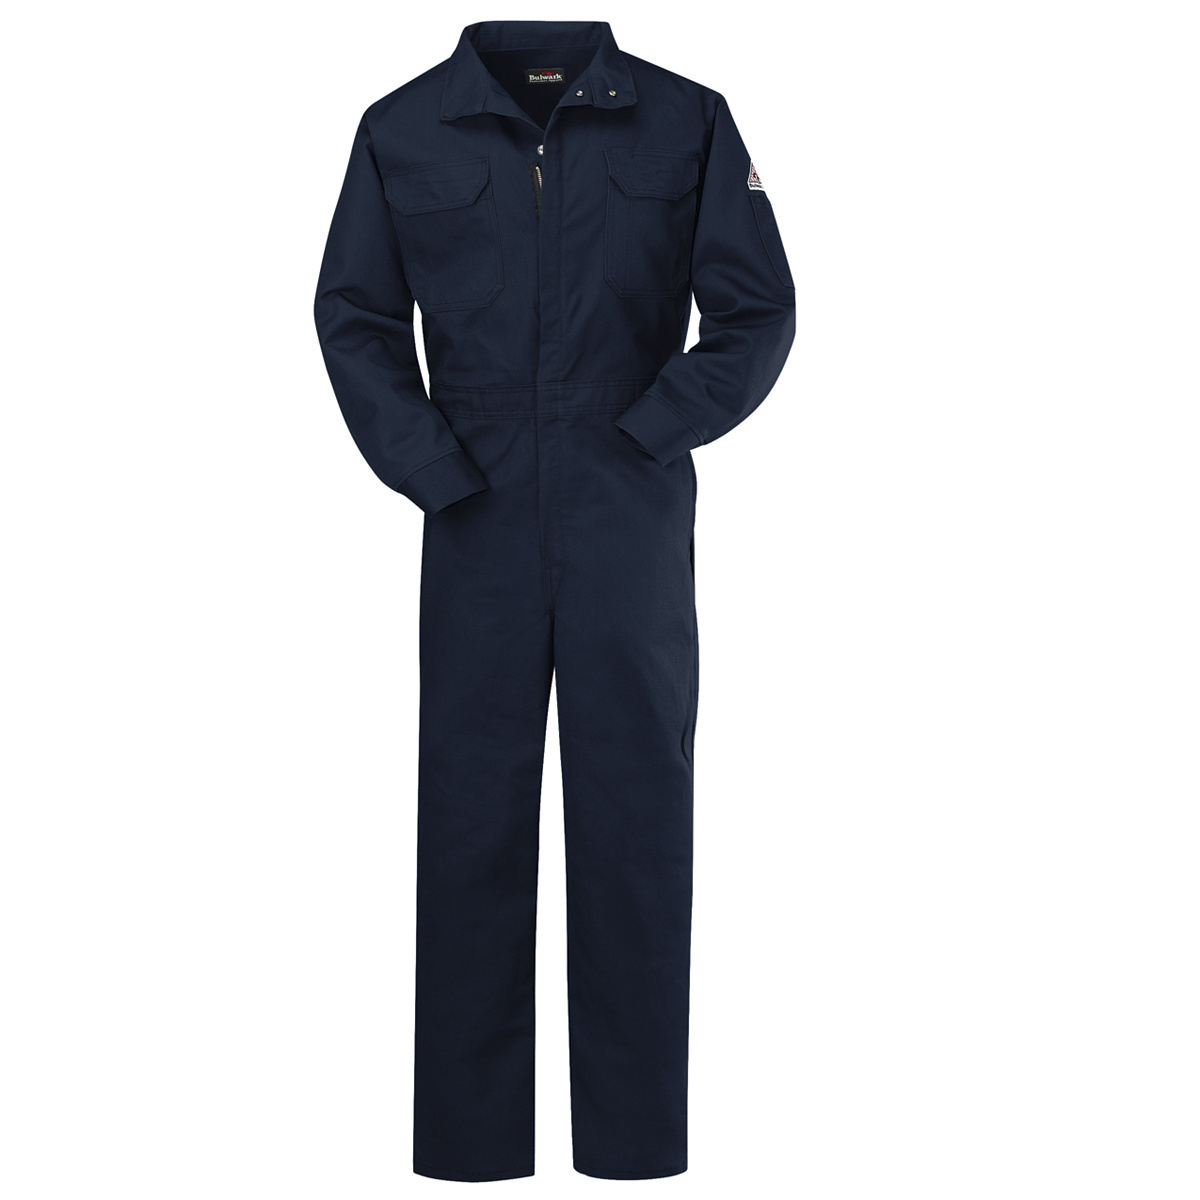 Bulwark® 38 Regular Navy Blue Westex Ultrasoft®/Cotton/Nylon Flame Resistant Coveralls With Zipper Front Closure